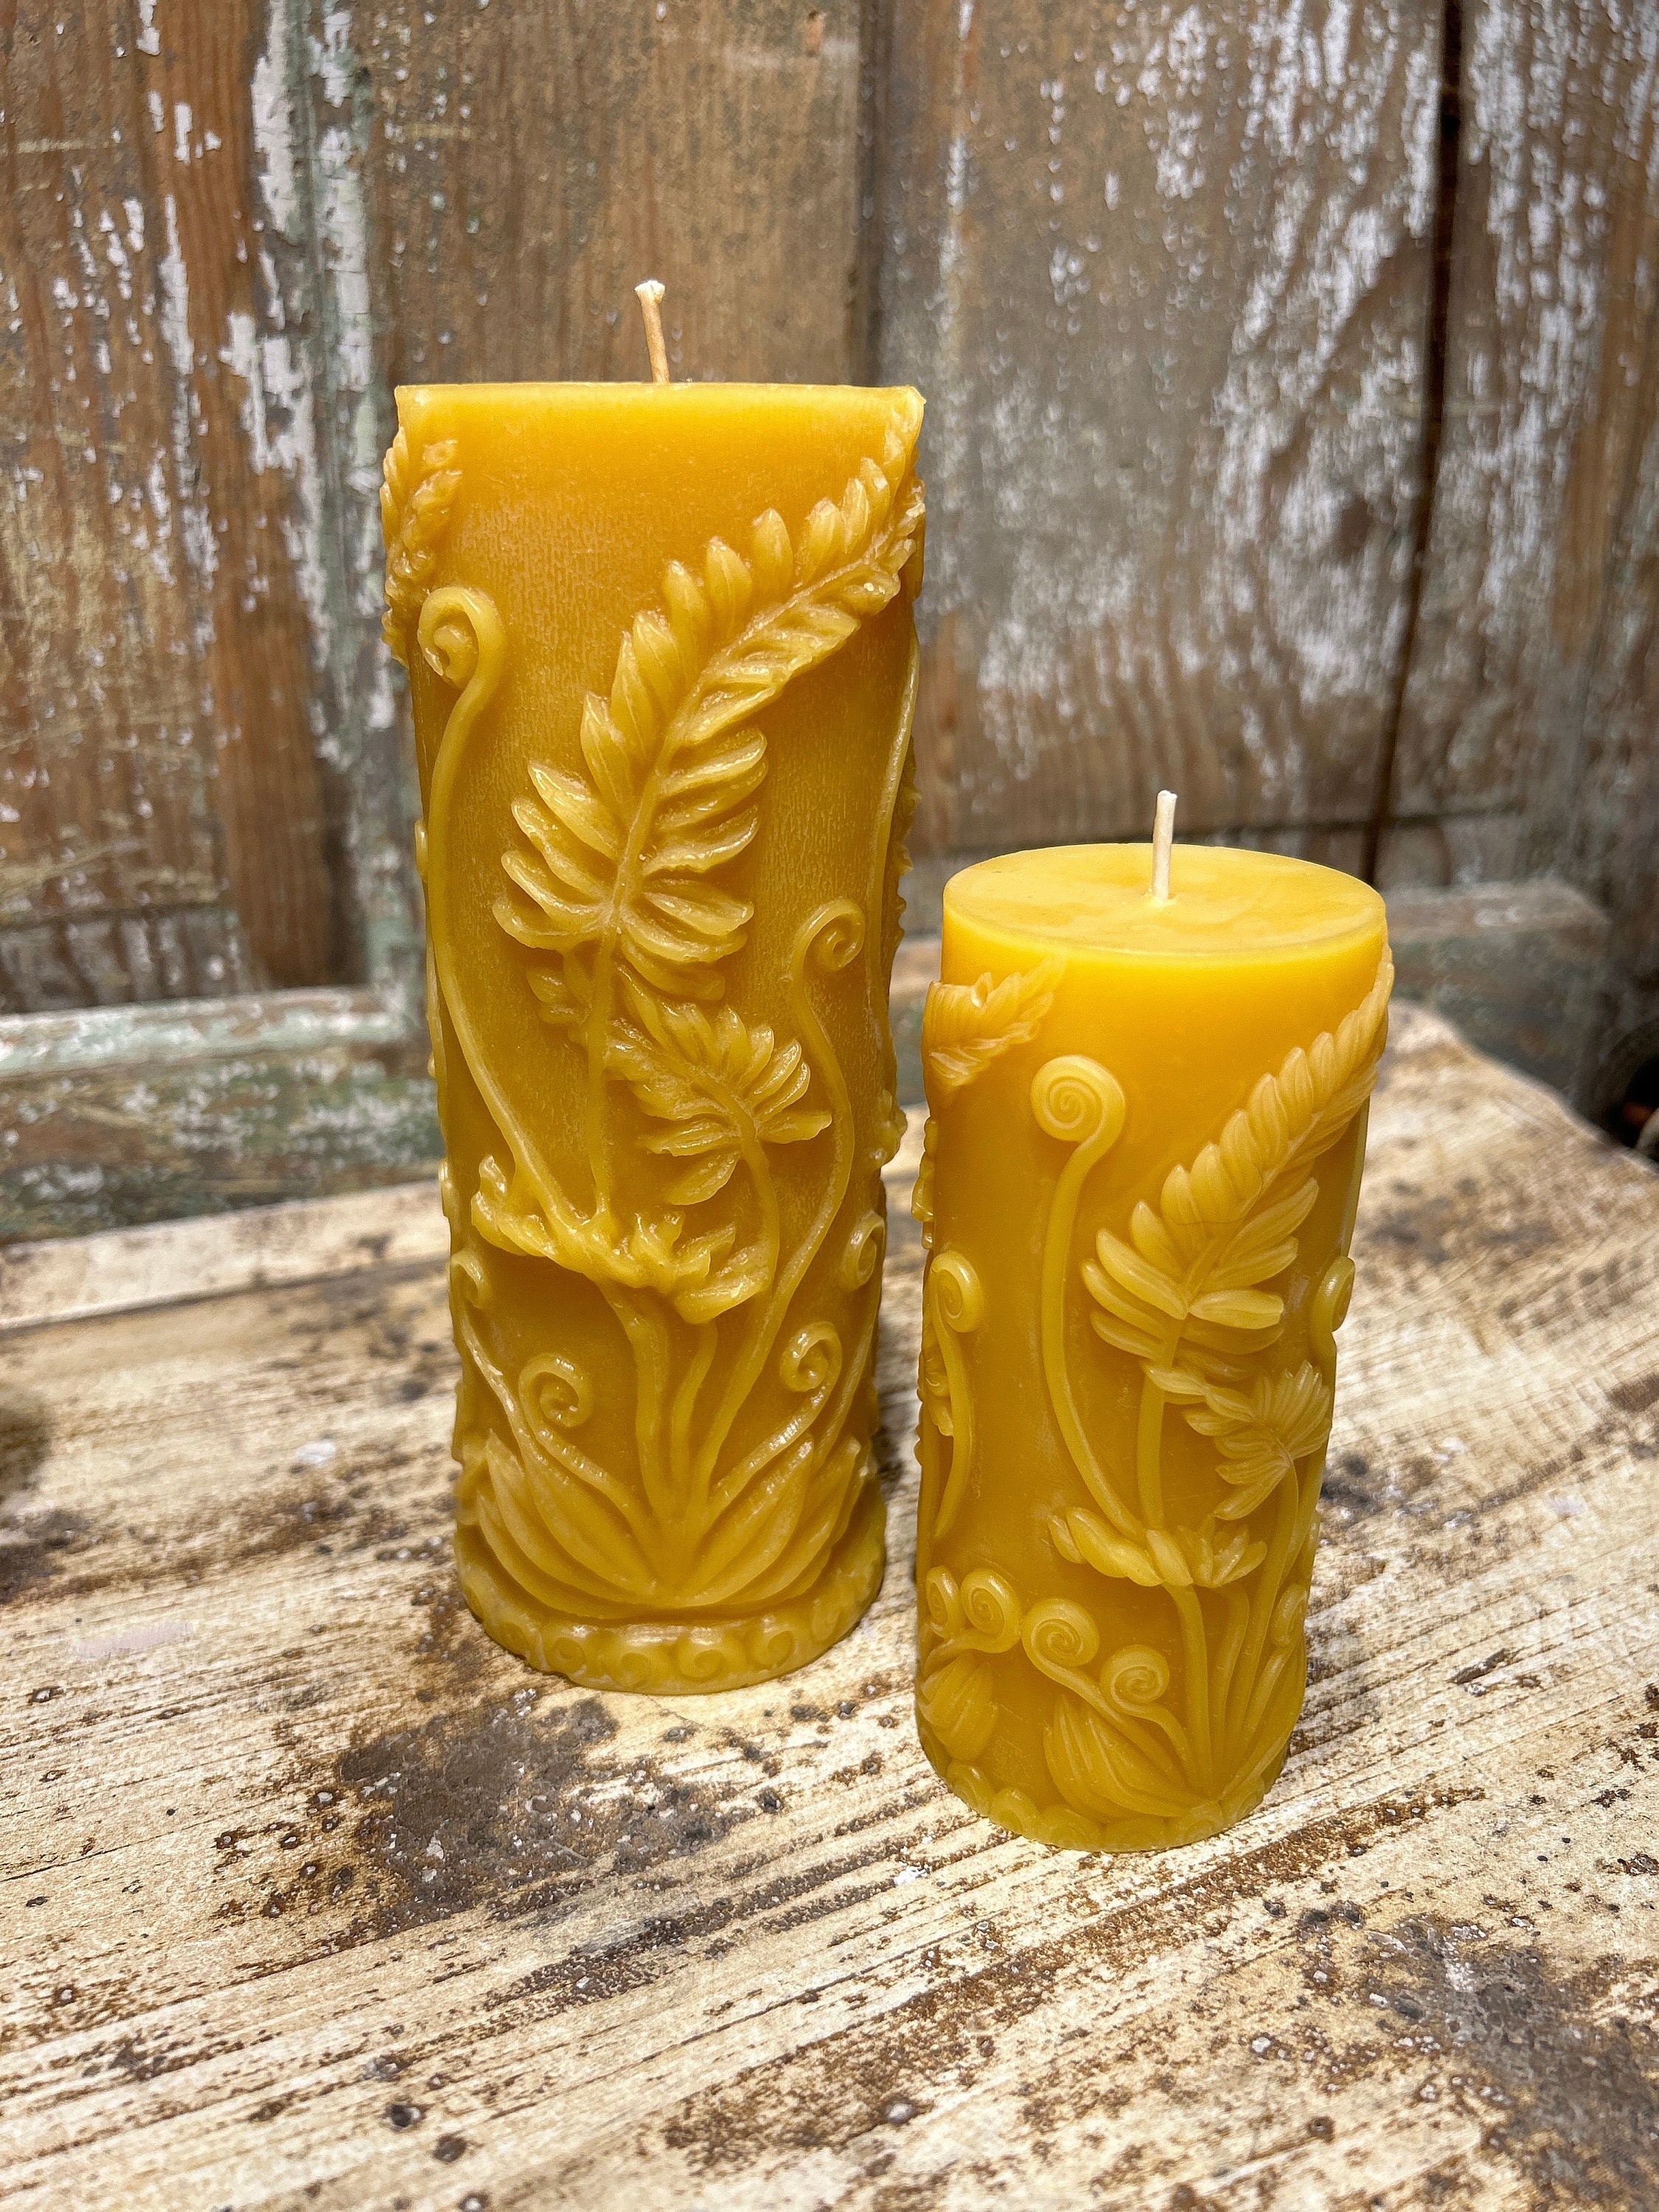 Honey Comb Beeswax Candle X2 Large and Small Beeswax Pillar Candle